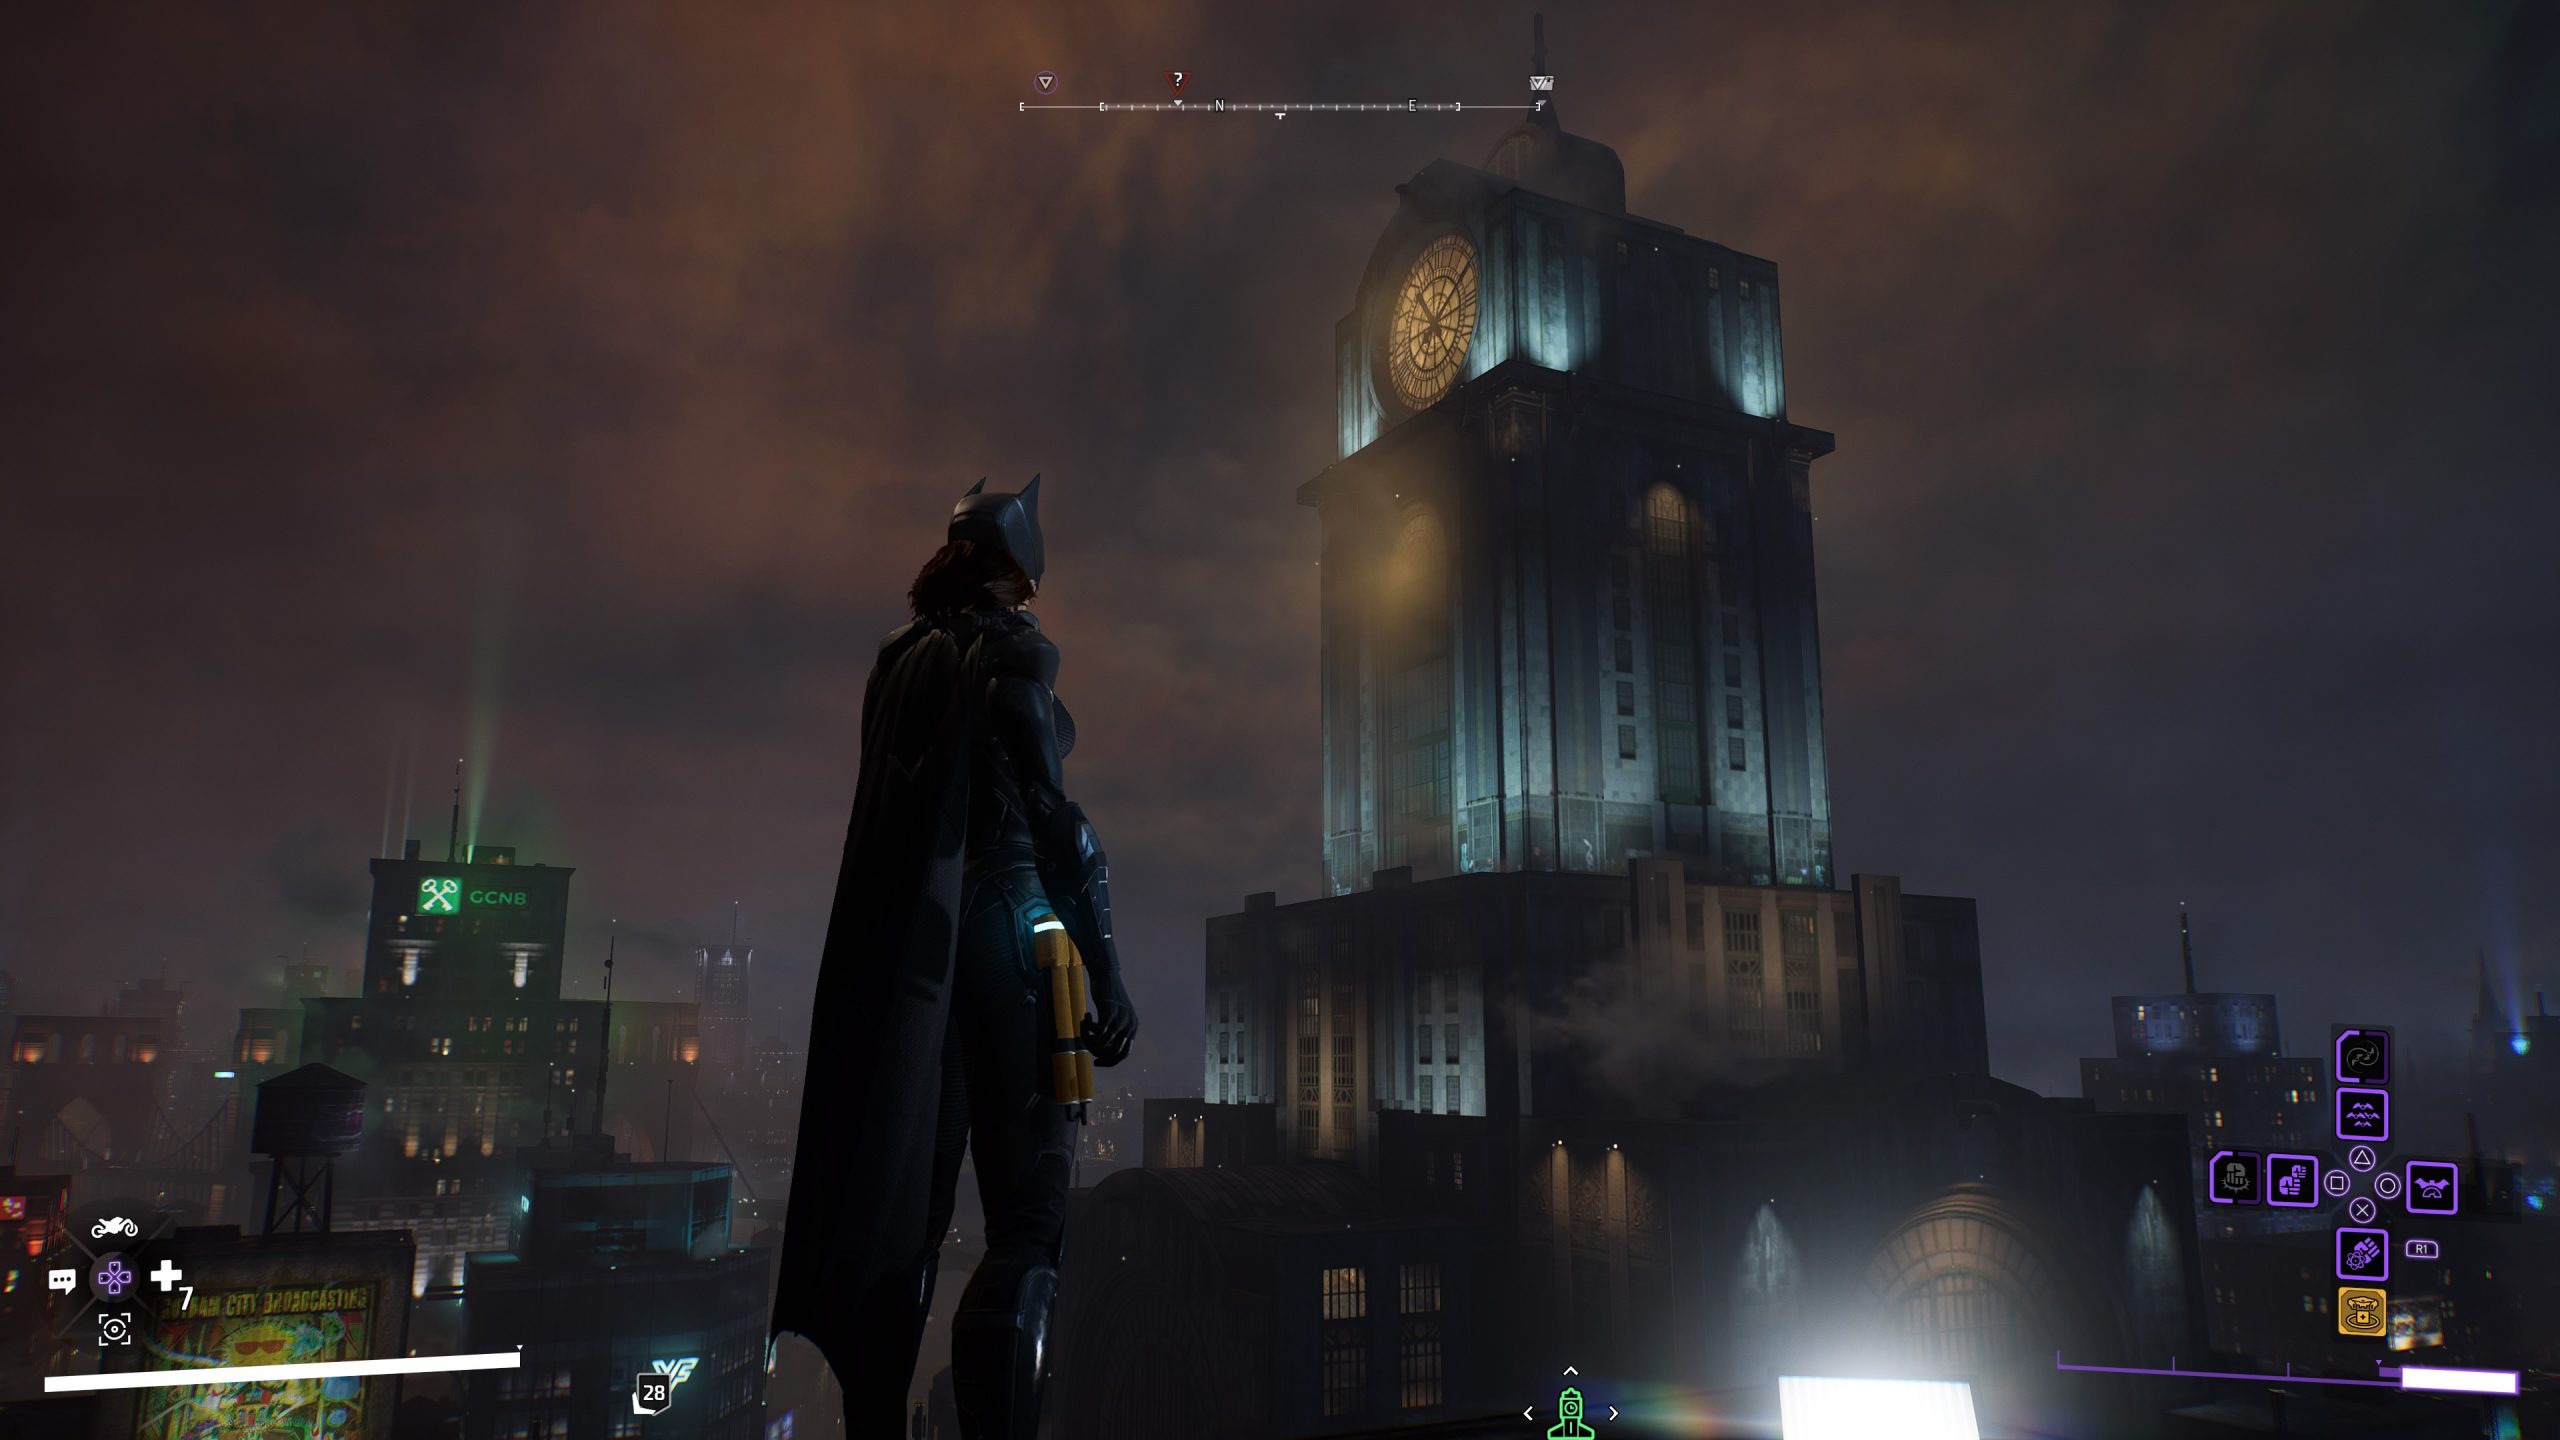 Gotham Knights Endgame: What To Do After Finishing The Game?